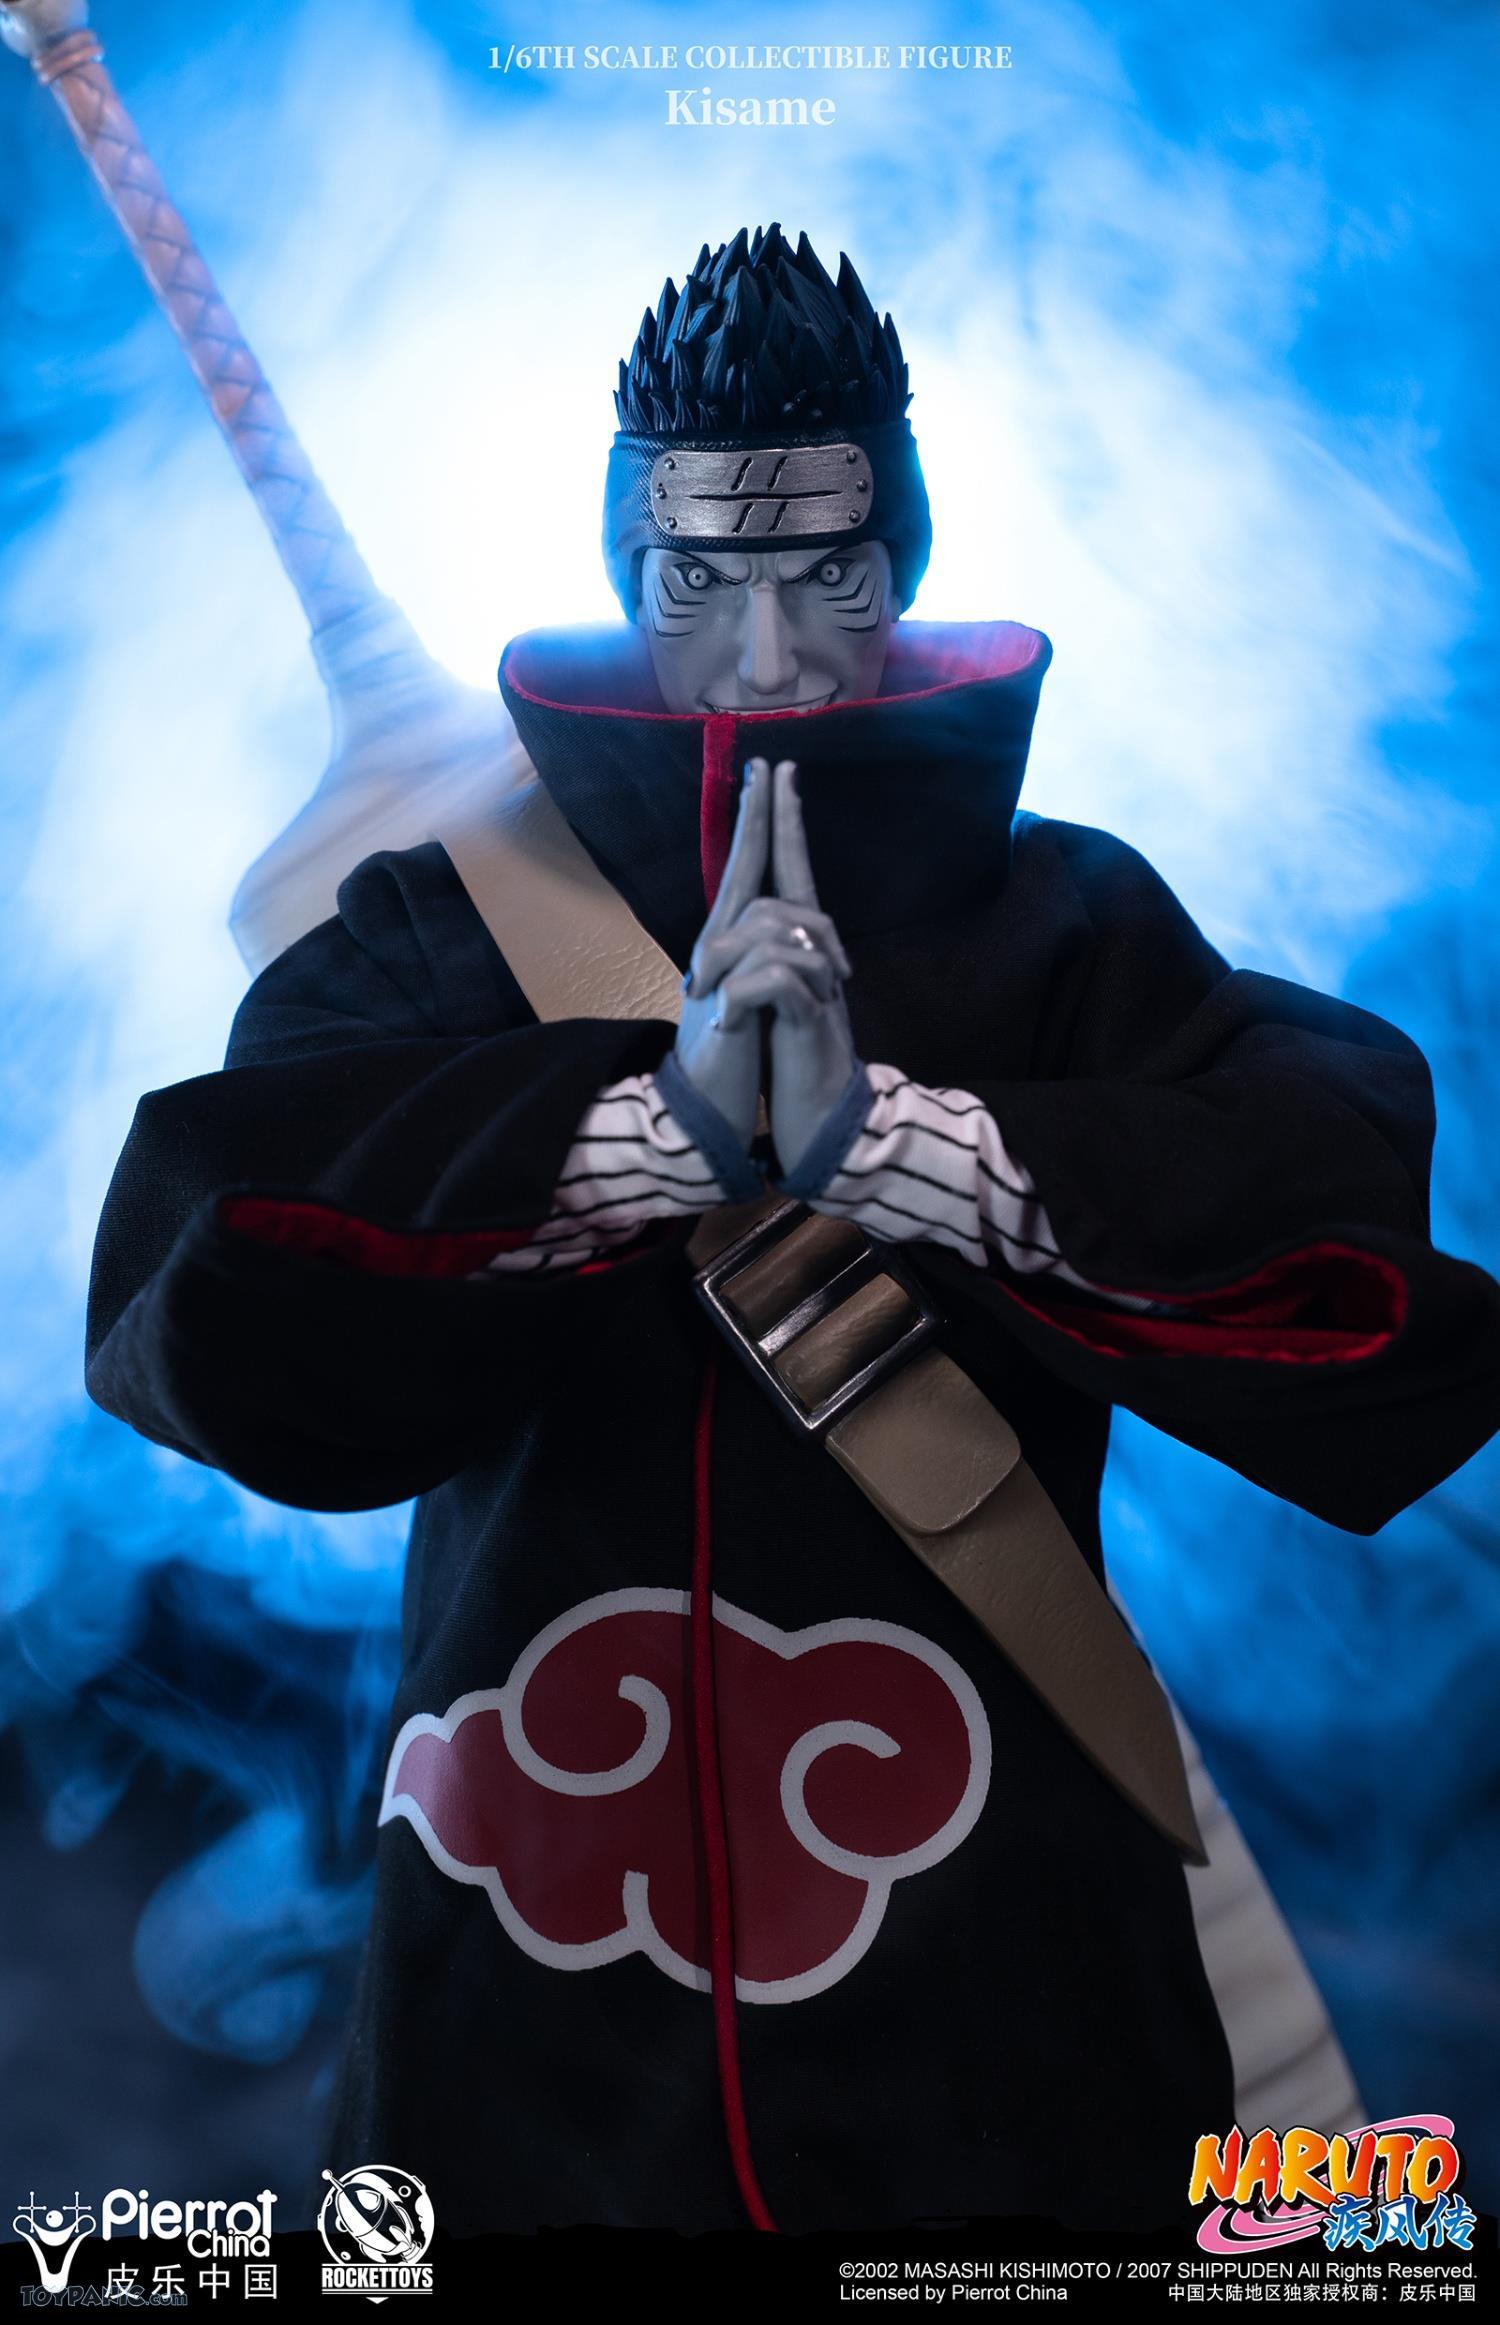 fantasy - NEW PRODUCT: Rocket Toys ROC-007 1/6 Scale Kisame 221202460437PM_9372204